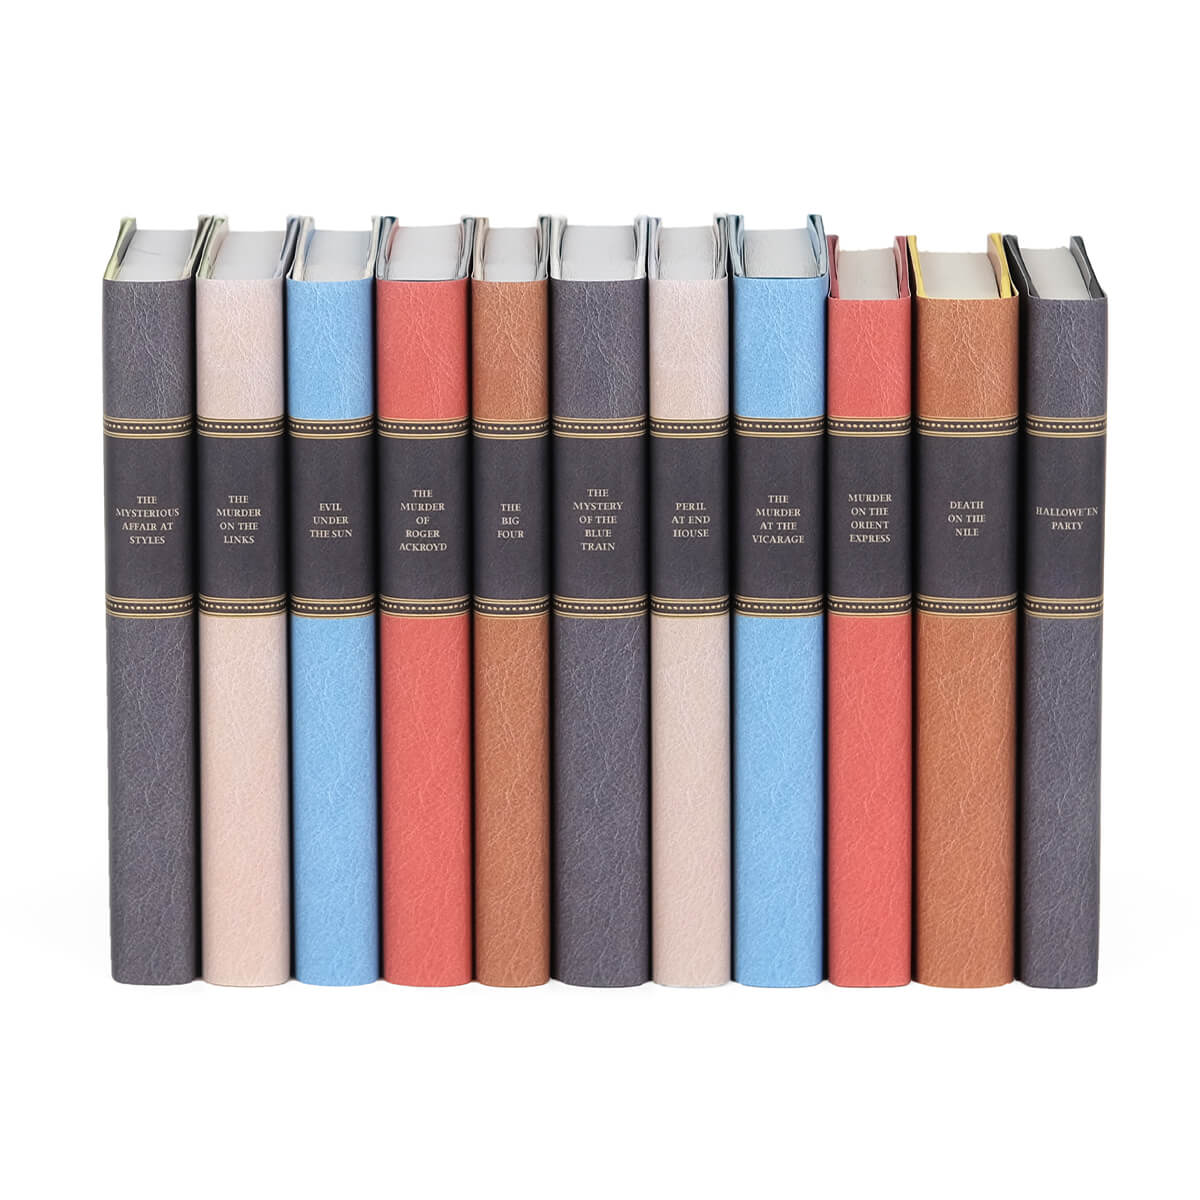 Agatha Christie books wrapped in custom collectible faux leather dust jackets  in black, beige, blue, red, light brown from Juniper Custom. Book spines feature book titles typed in gold color serif font set against back faux leather.